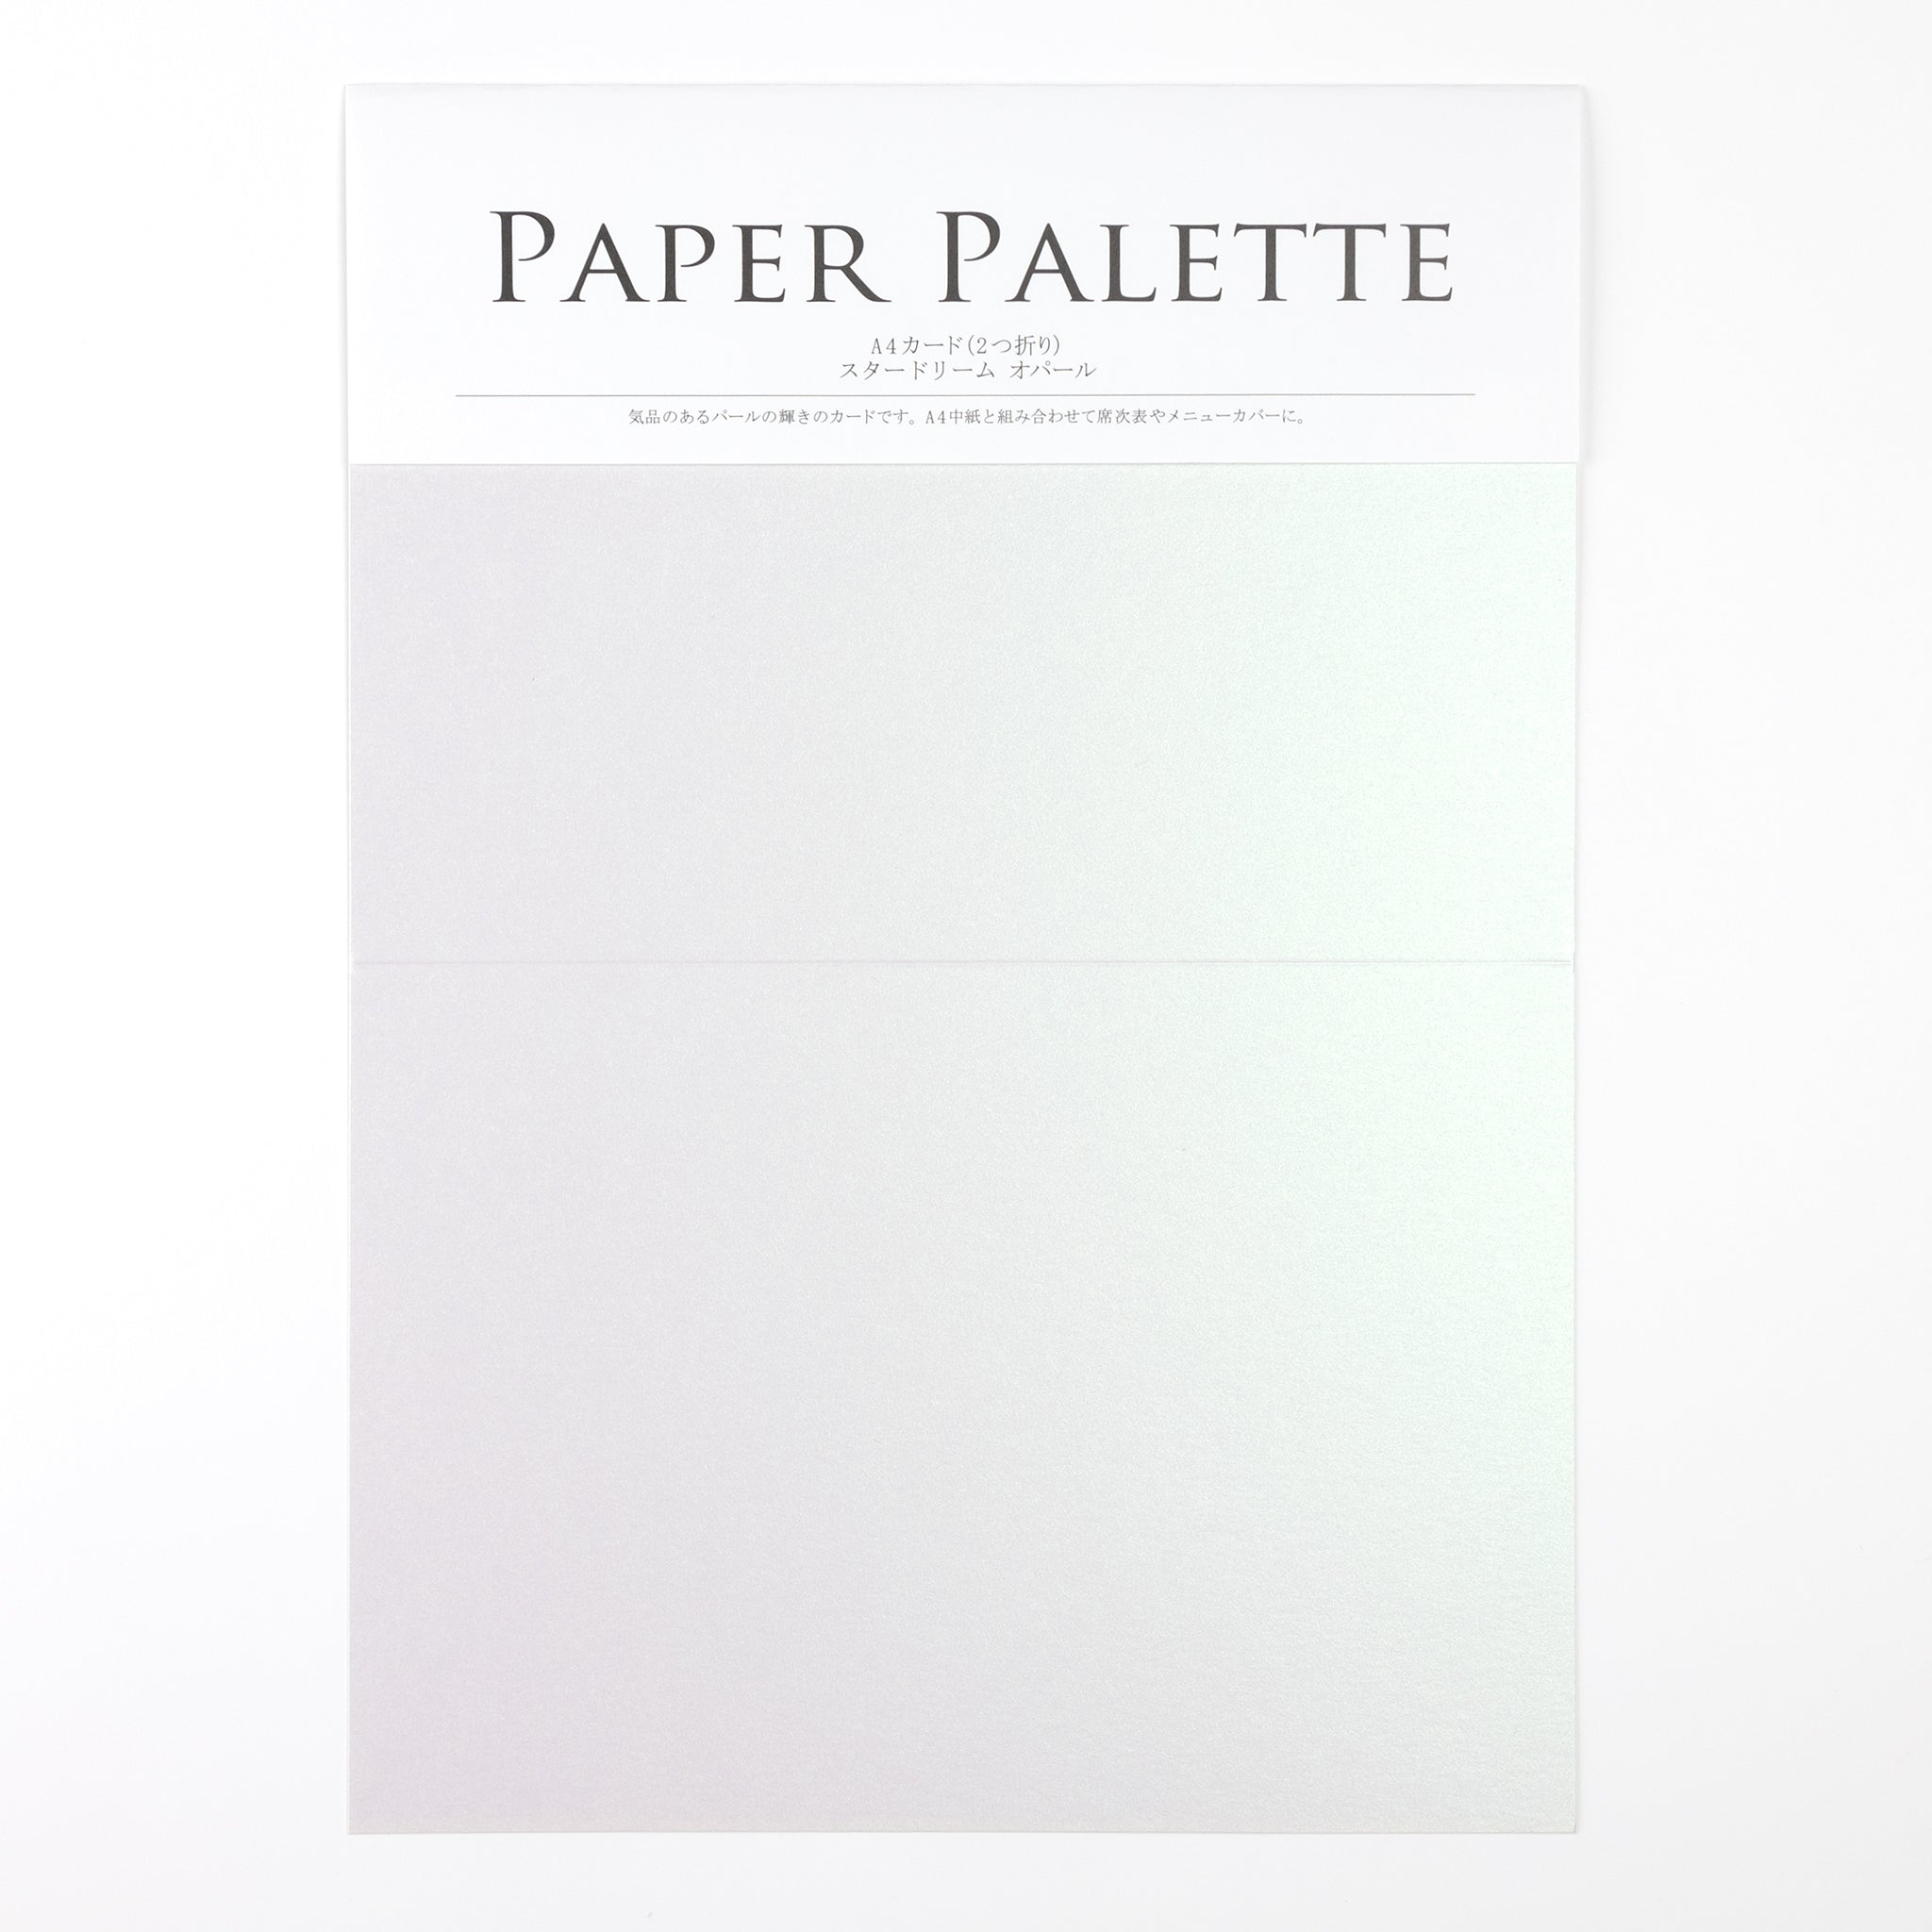 PAPER PALETTE A4カード – products.takeopaper.com